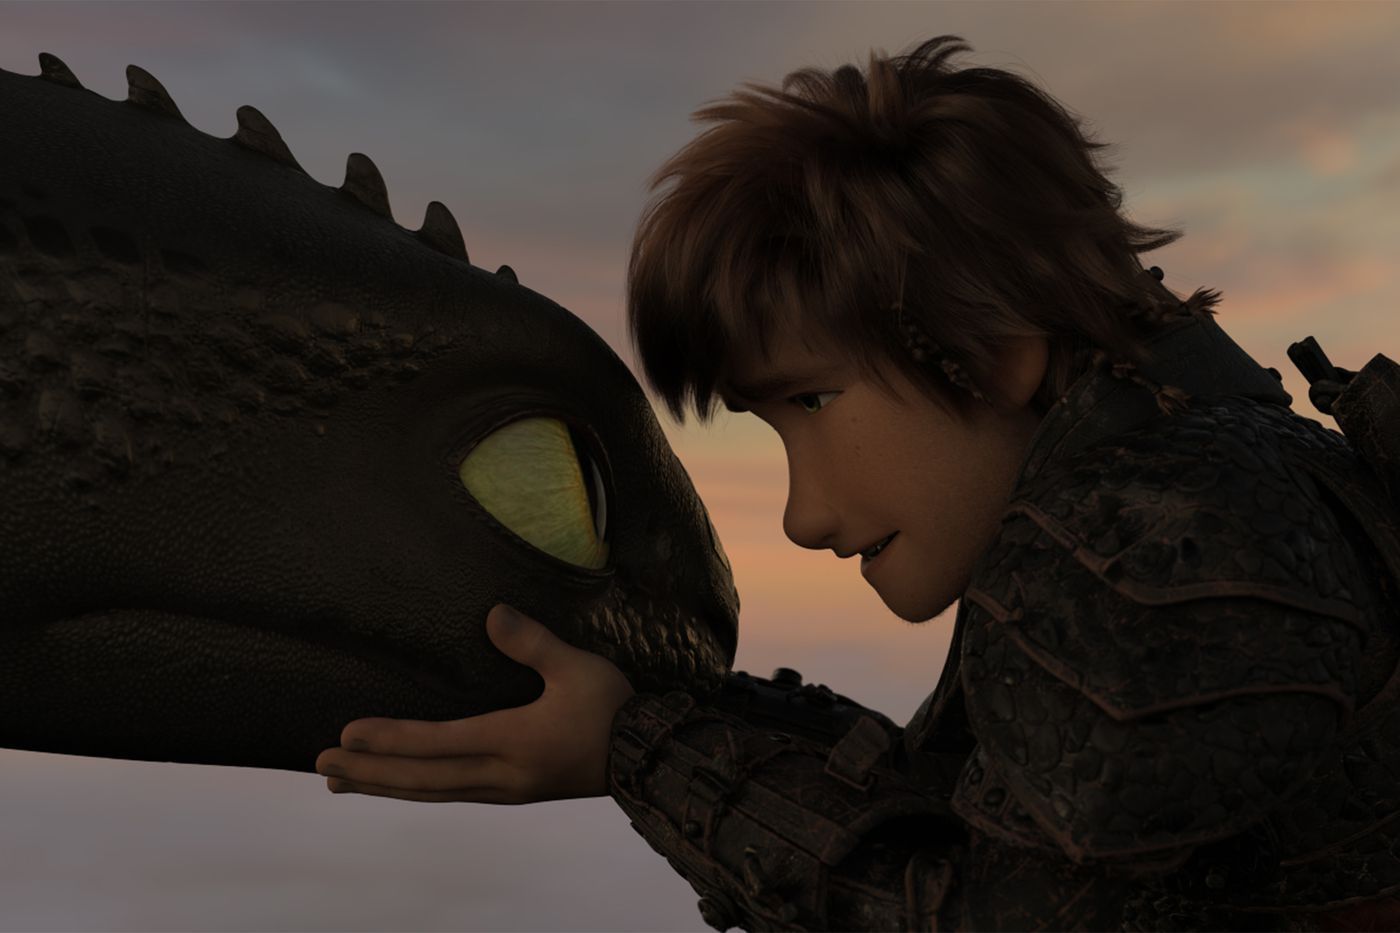 How to Train Your Dragon 3 review: a beautiful, bittersweet finale